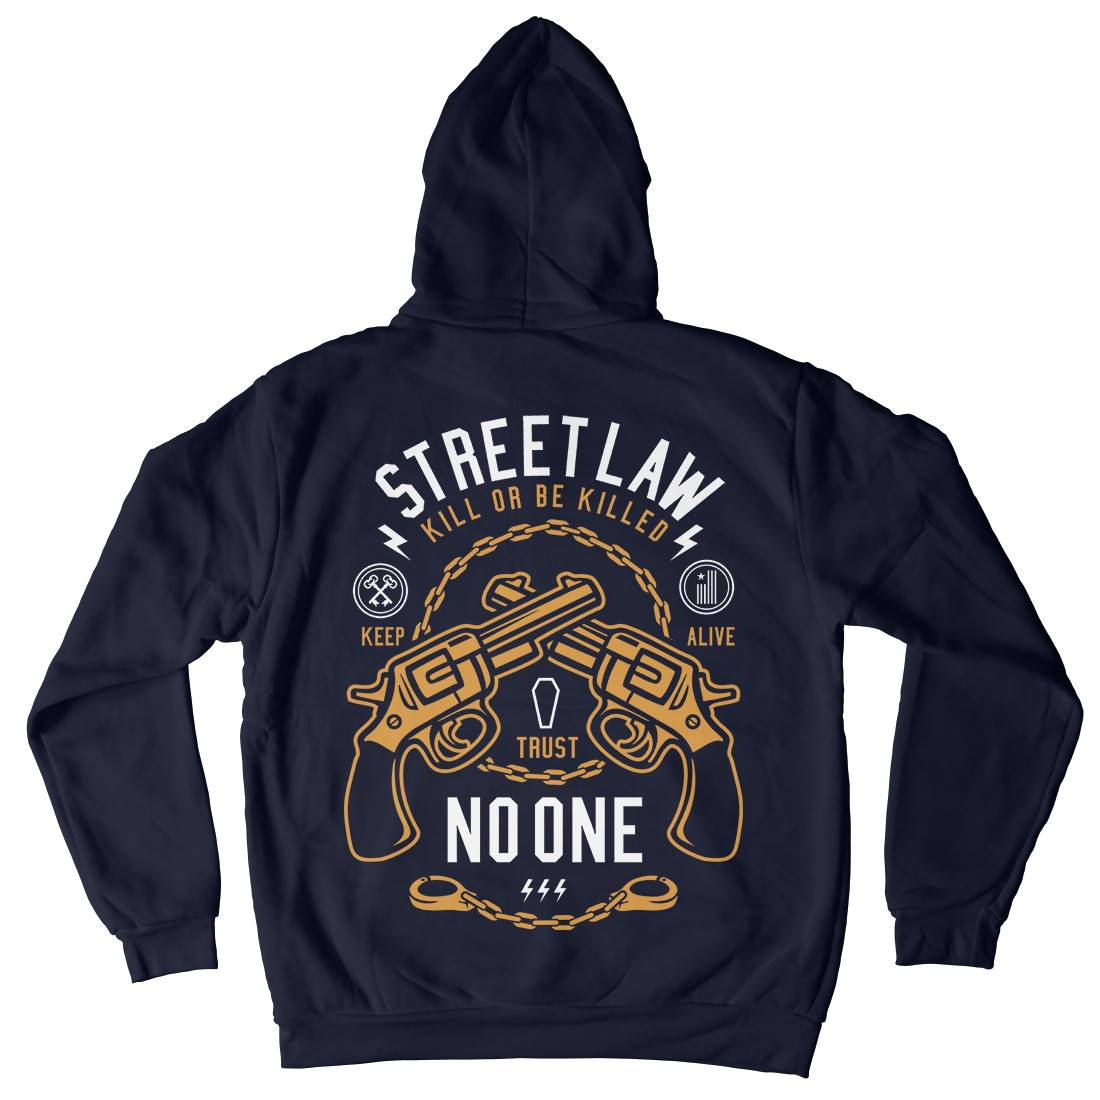 Street Law Mens Hoodie With Pocket Quotes A286